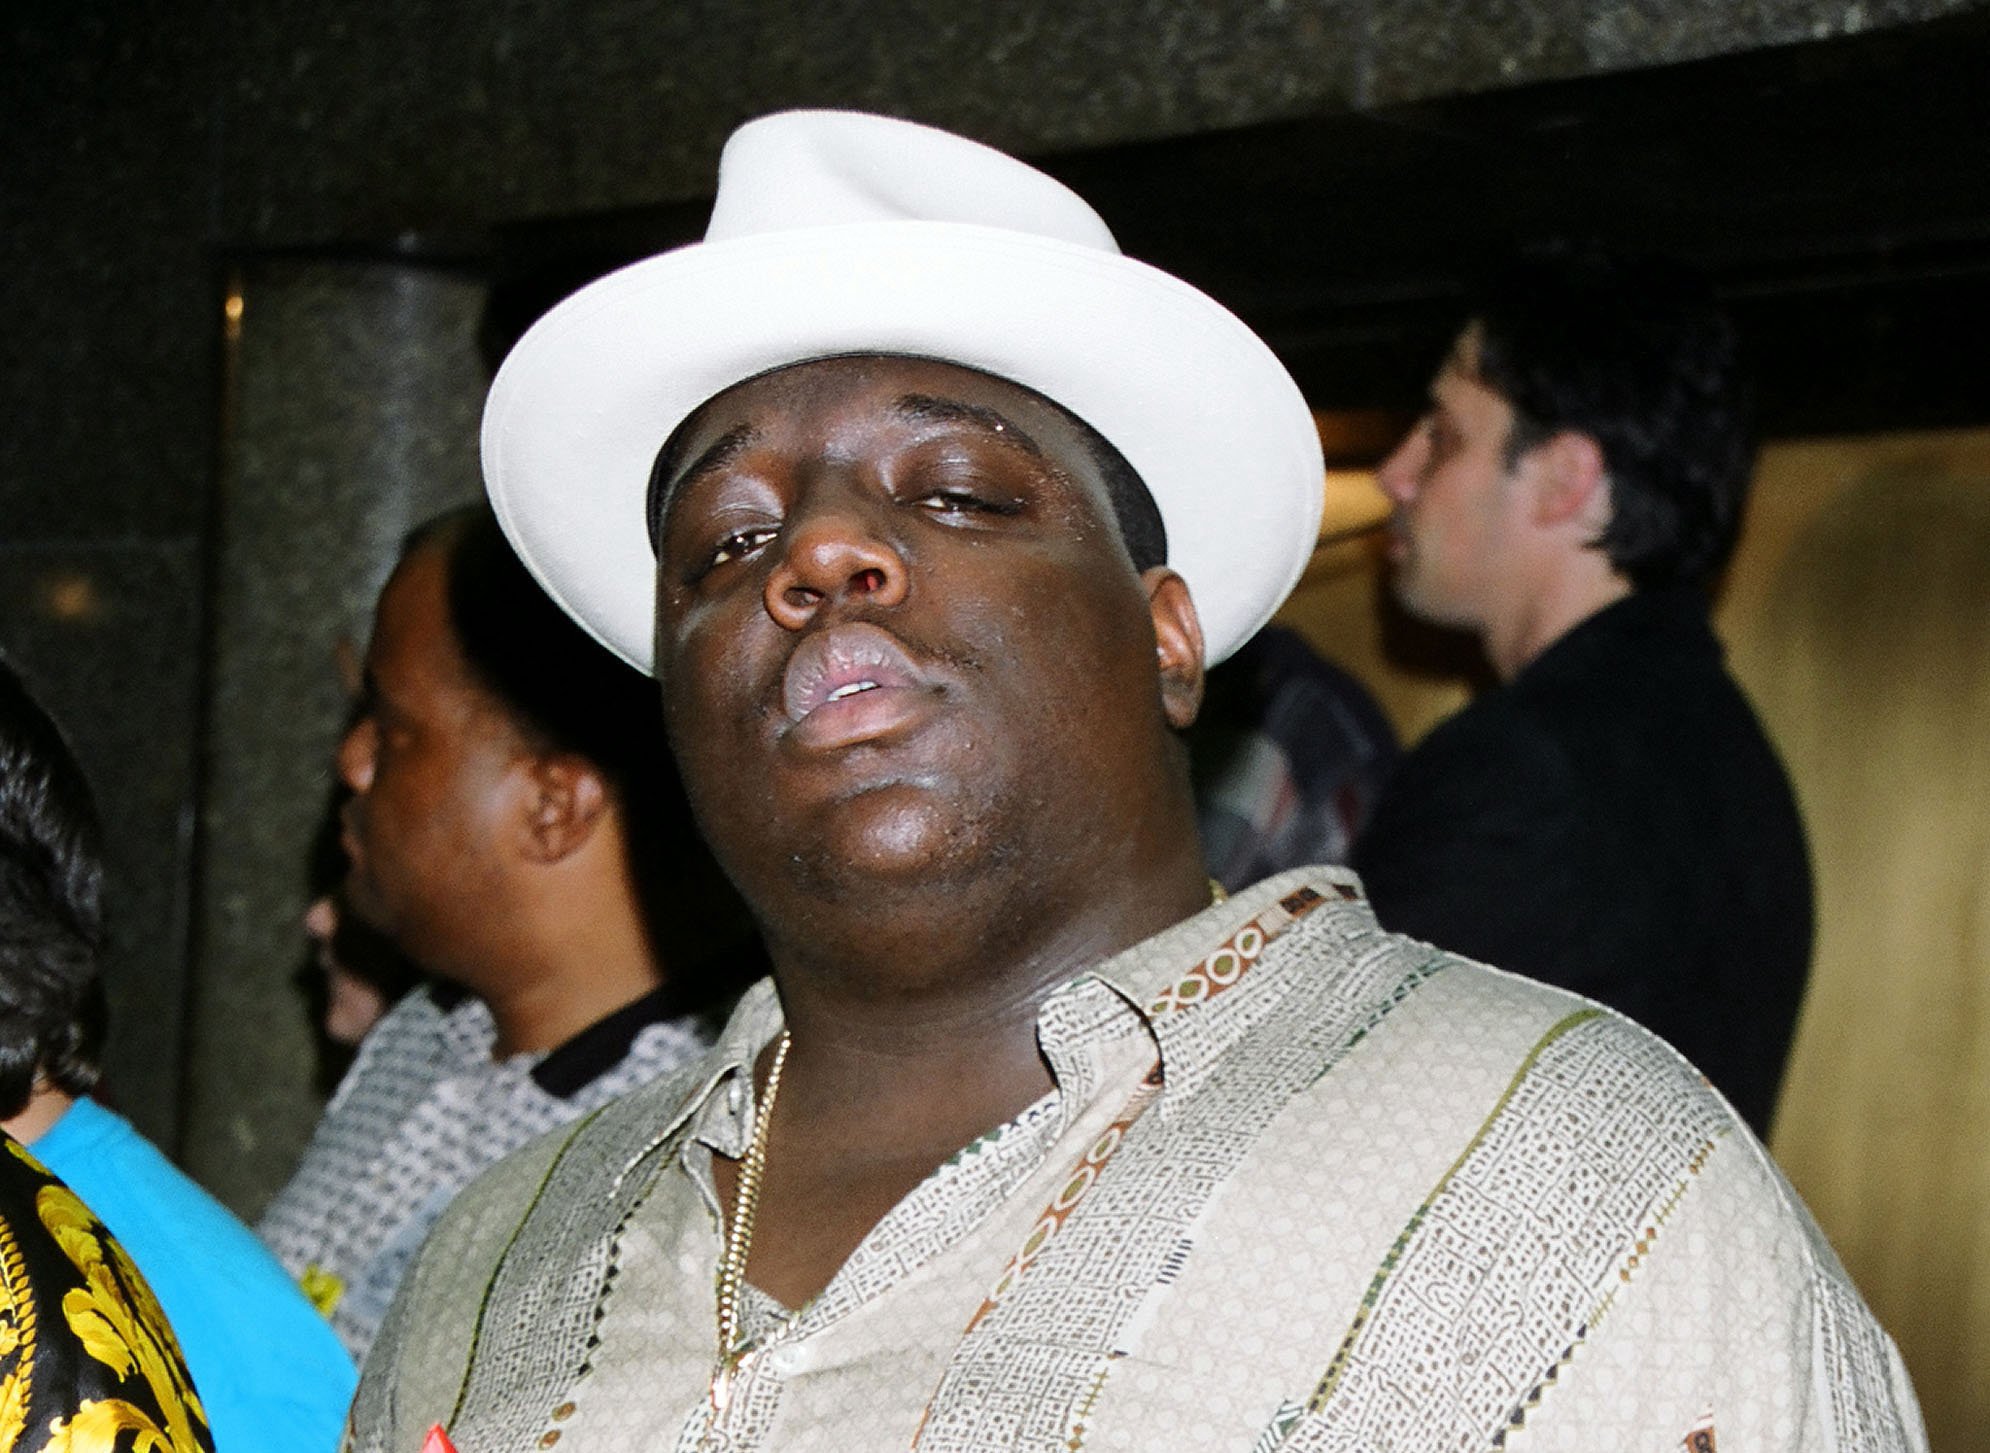 The Notorius B.I.G. wearing a hat